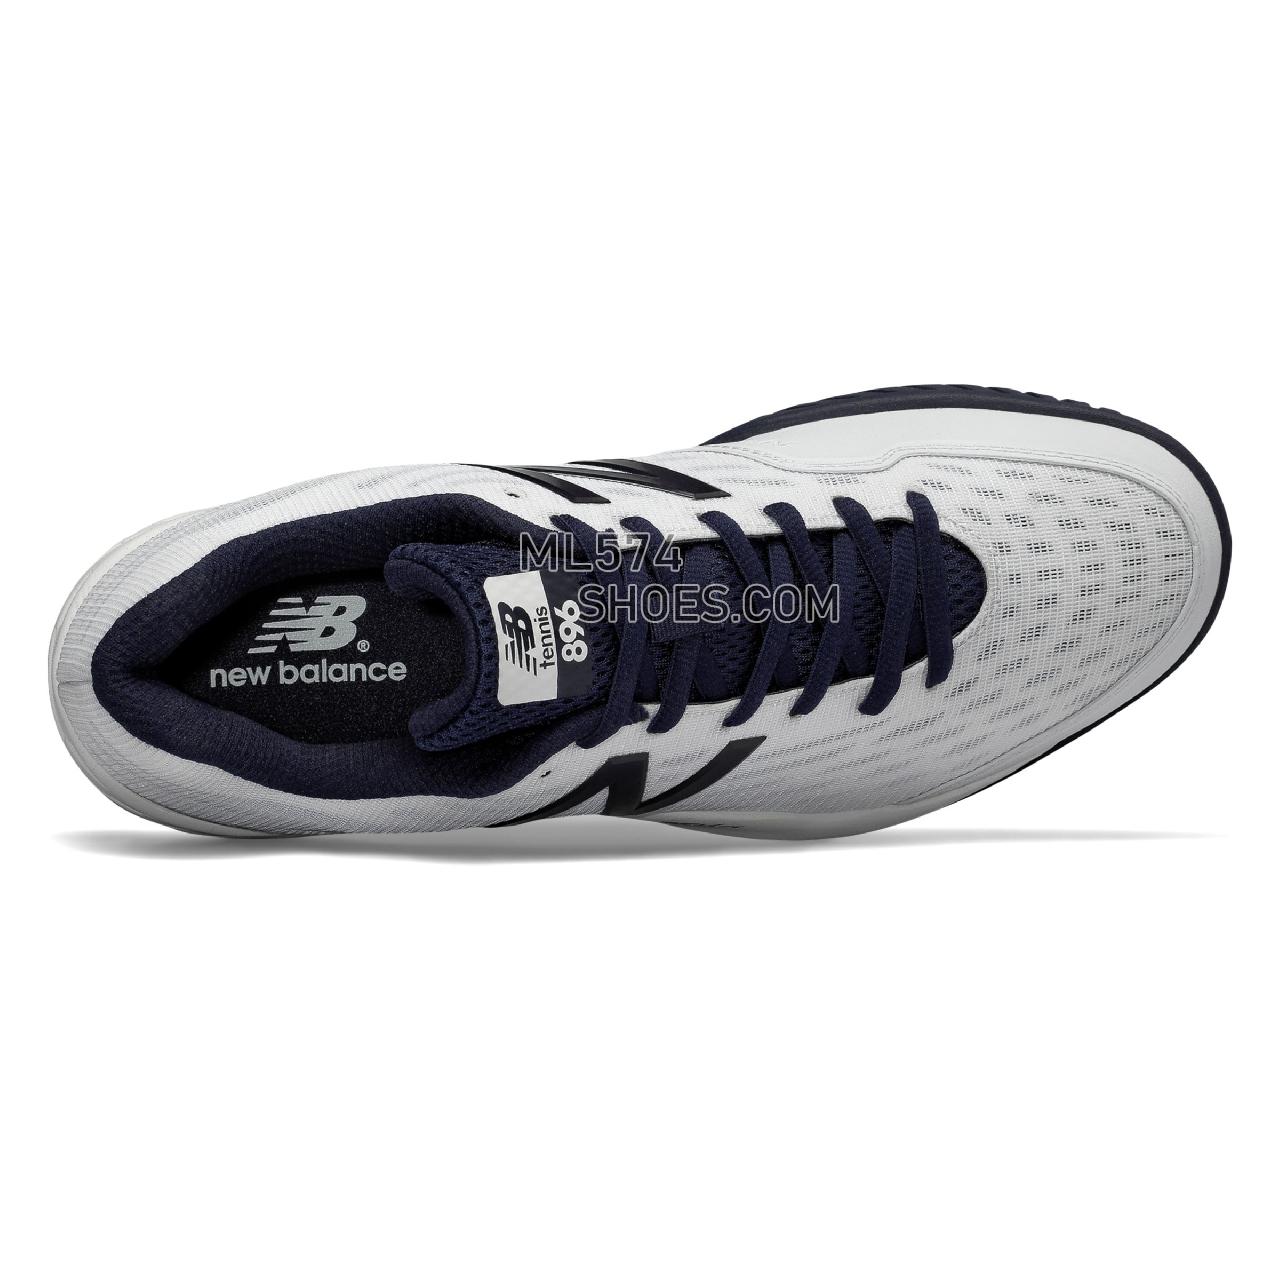 New Balance 896v2 - Men's 896 - Tennis / Court White with Navy and Black - MCH896W2